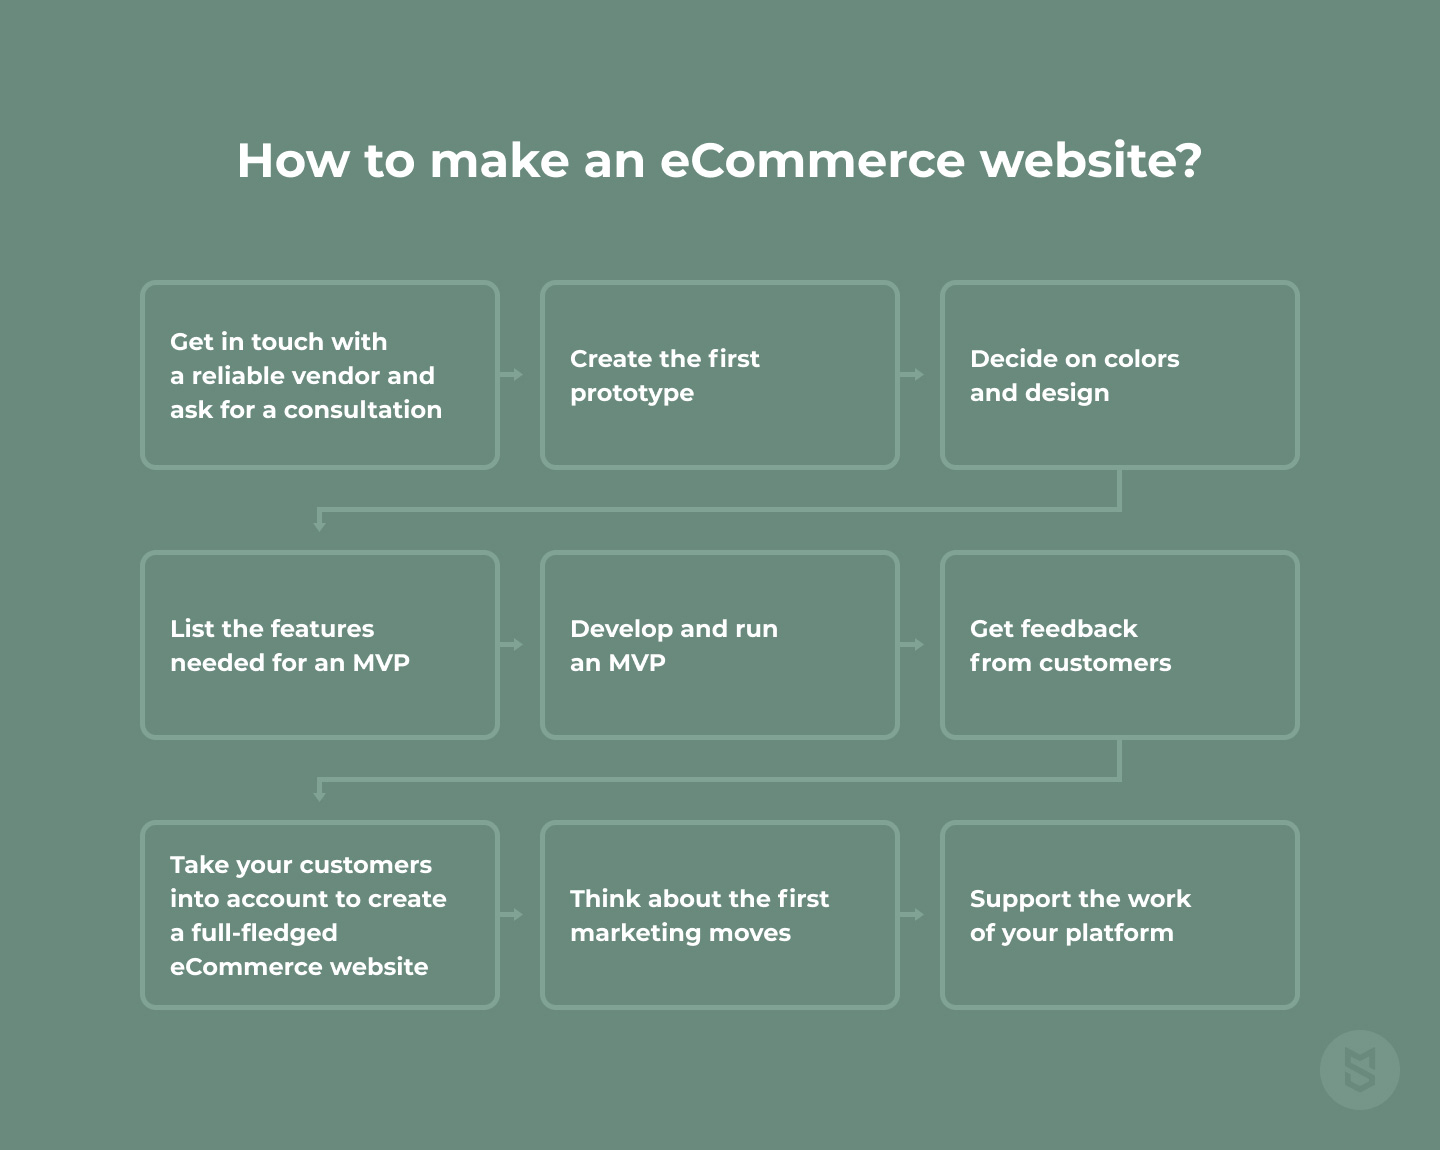 How to create an eCommerce website?